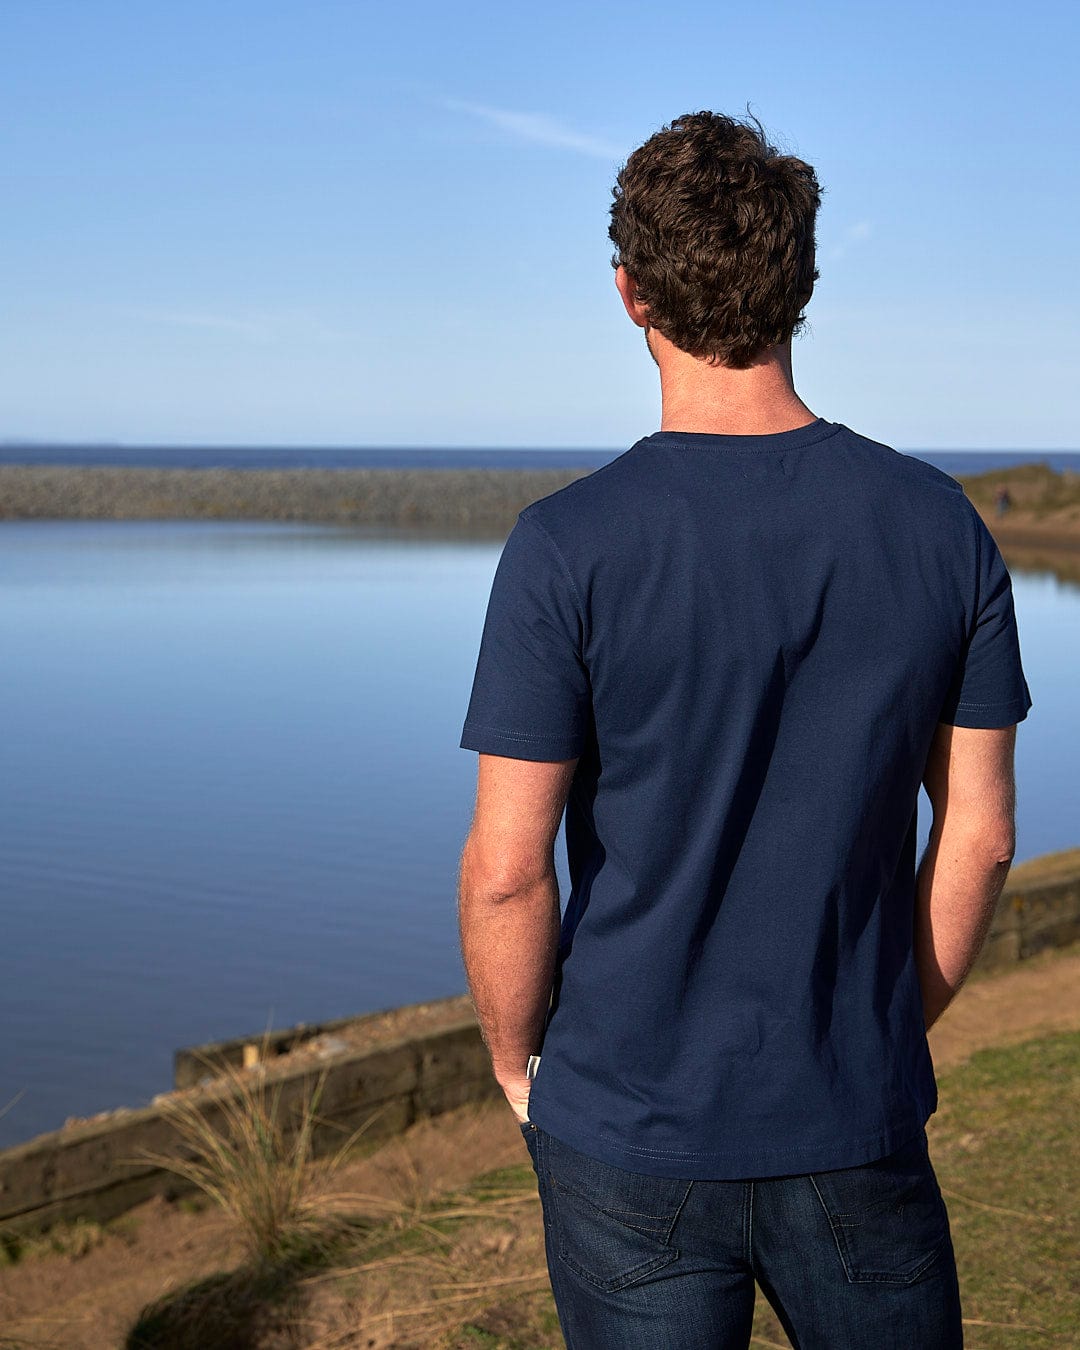 The Saltrock Live Life Location - Mens Short Sleeve T-Shirt - Blue is being worn by a man looking at a body of water.